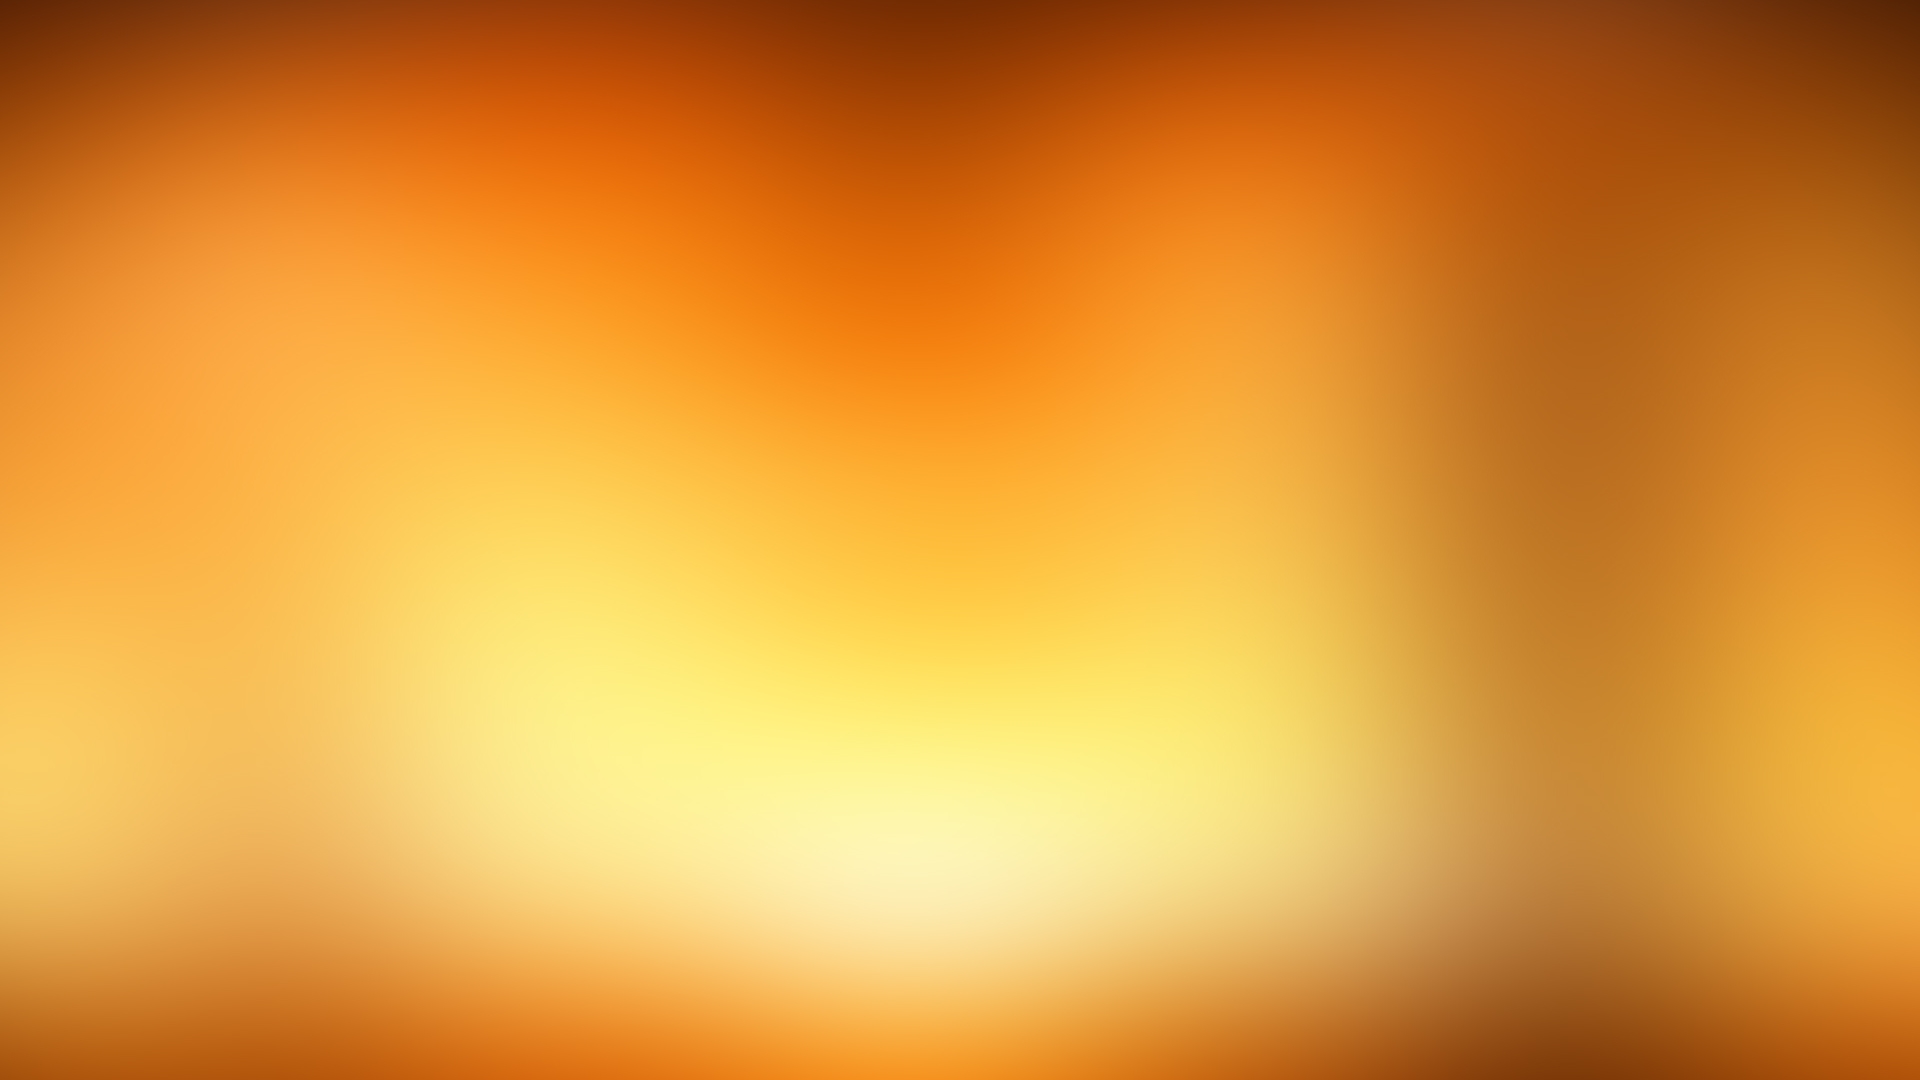 warm gradient wallpaper 7401 7687 hd wallpapers The Criterion 1920x1080